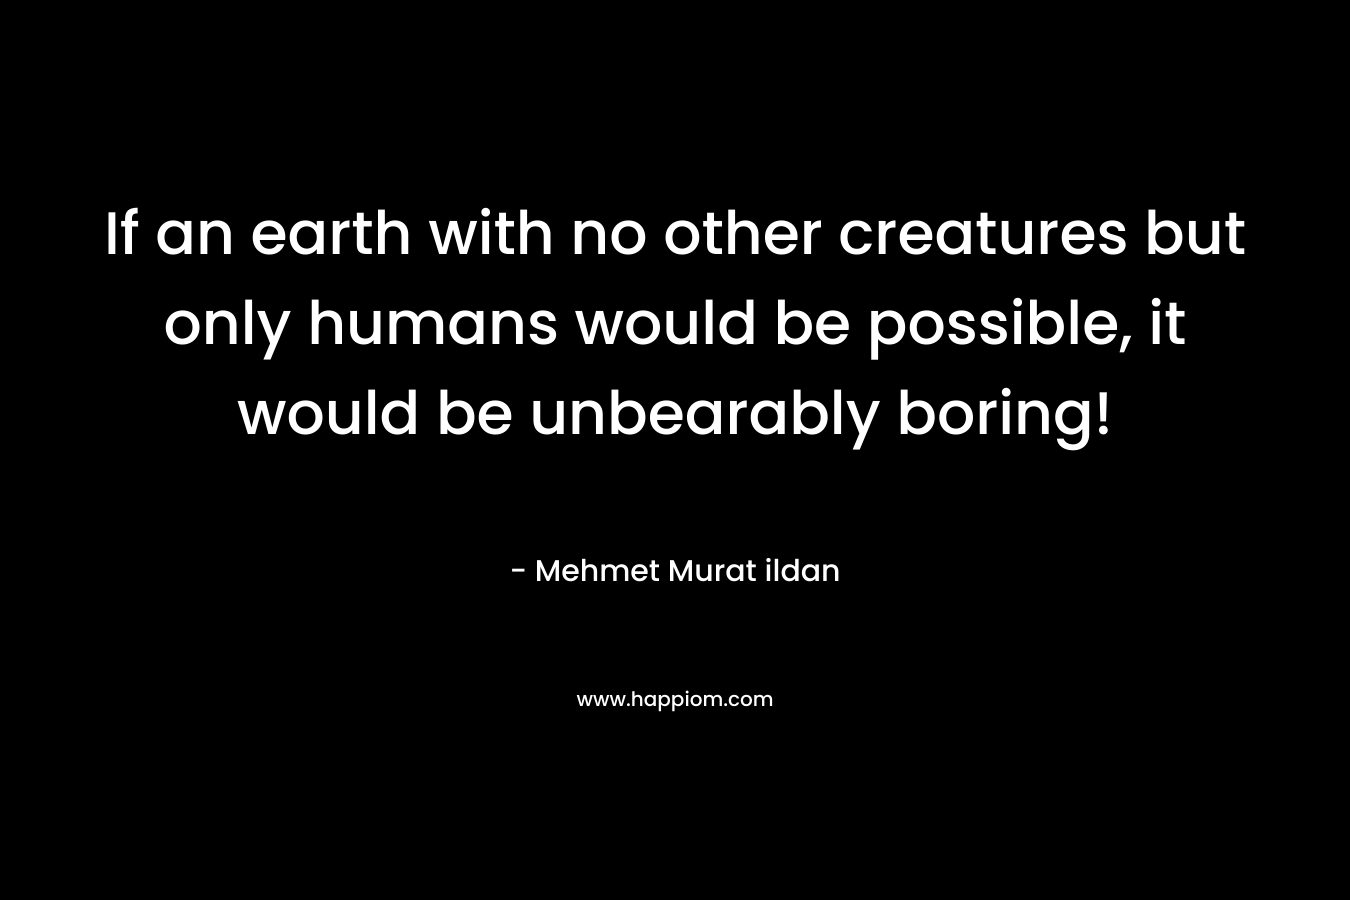 If an earth with no other creatures but only humans would be possible, it would be unbearably boring!